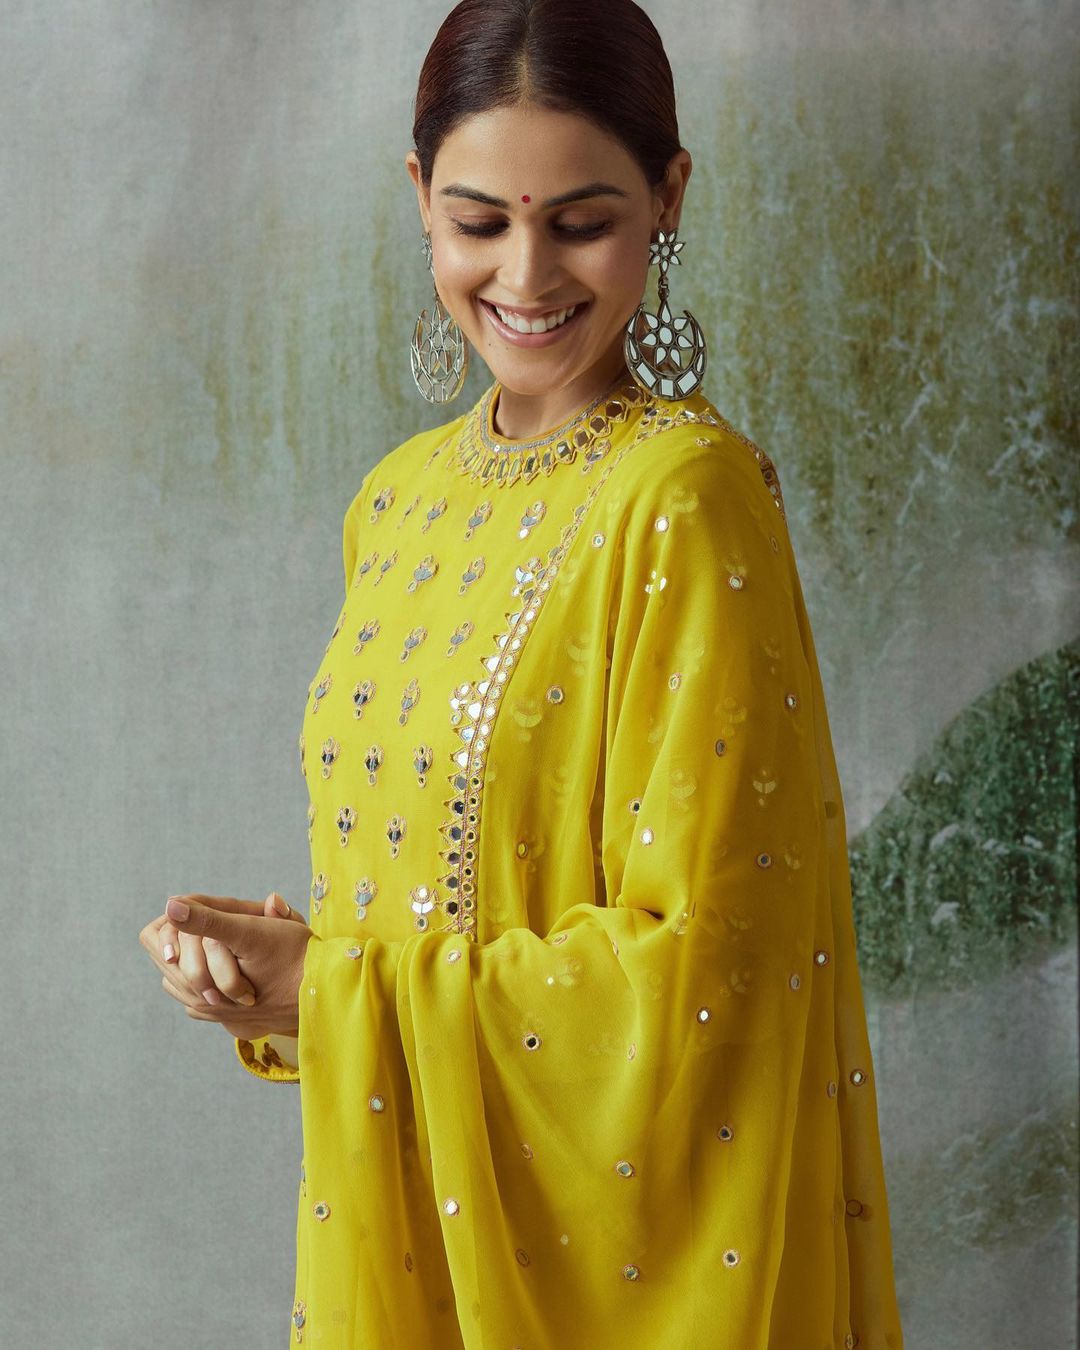 Genelia D'Souza Oozes Elegance In Yellow Saree, Check Out Diva Ace The ...